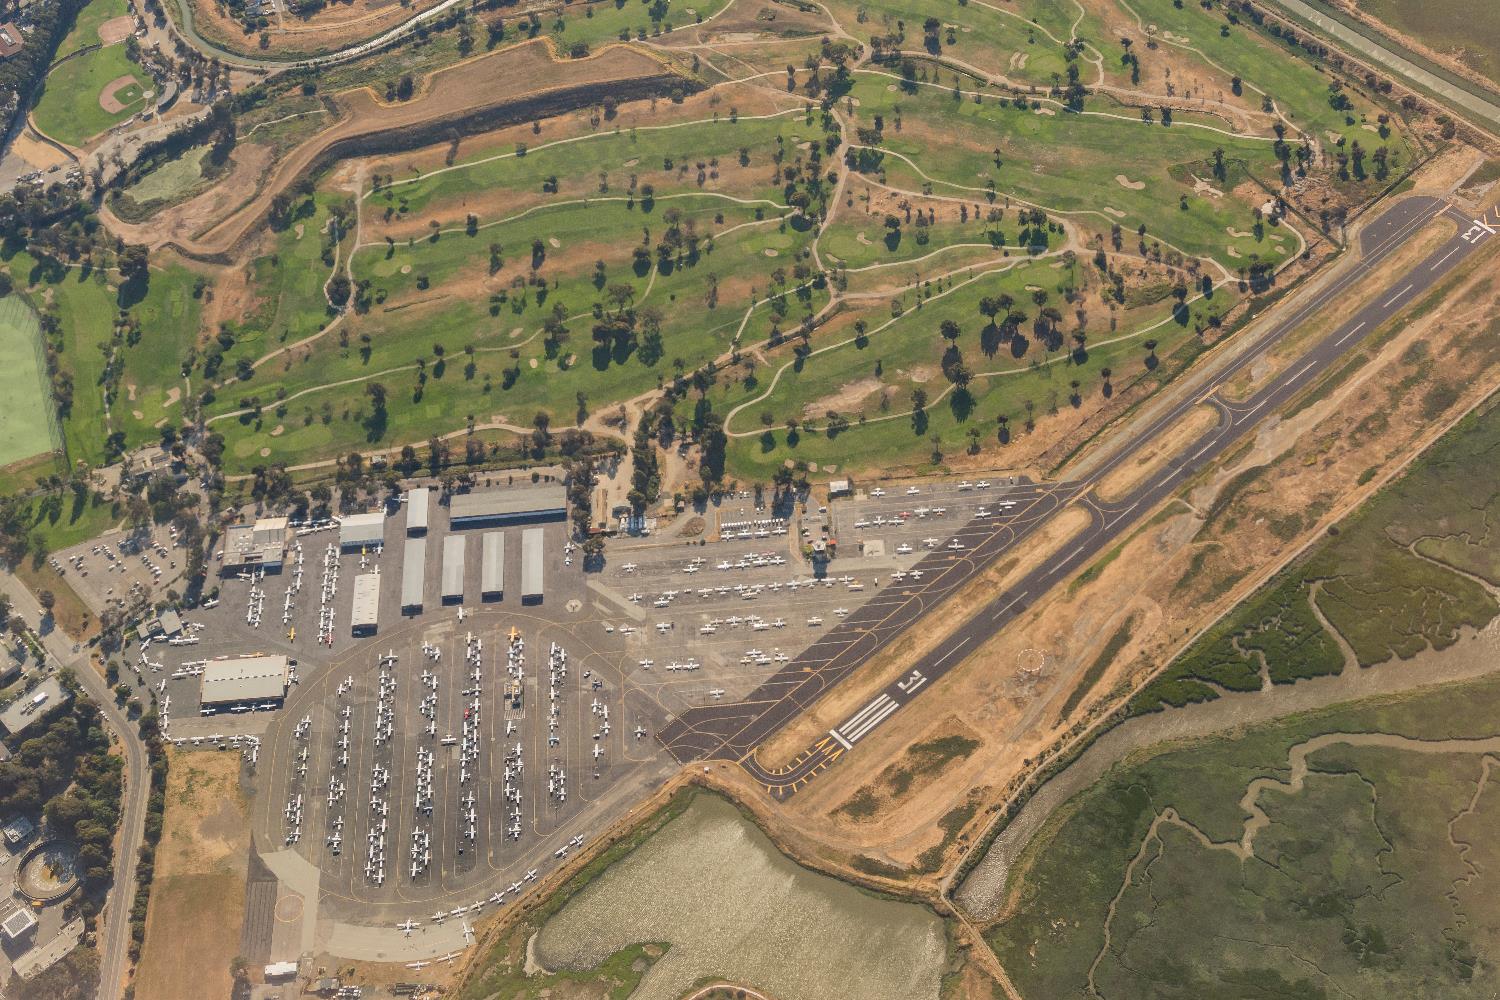 Aerial view of the Palo Alto airport and golf course